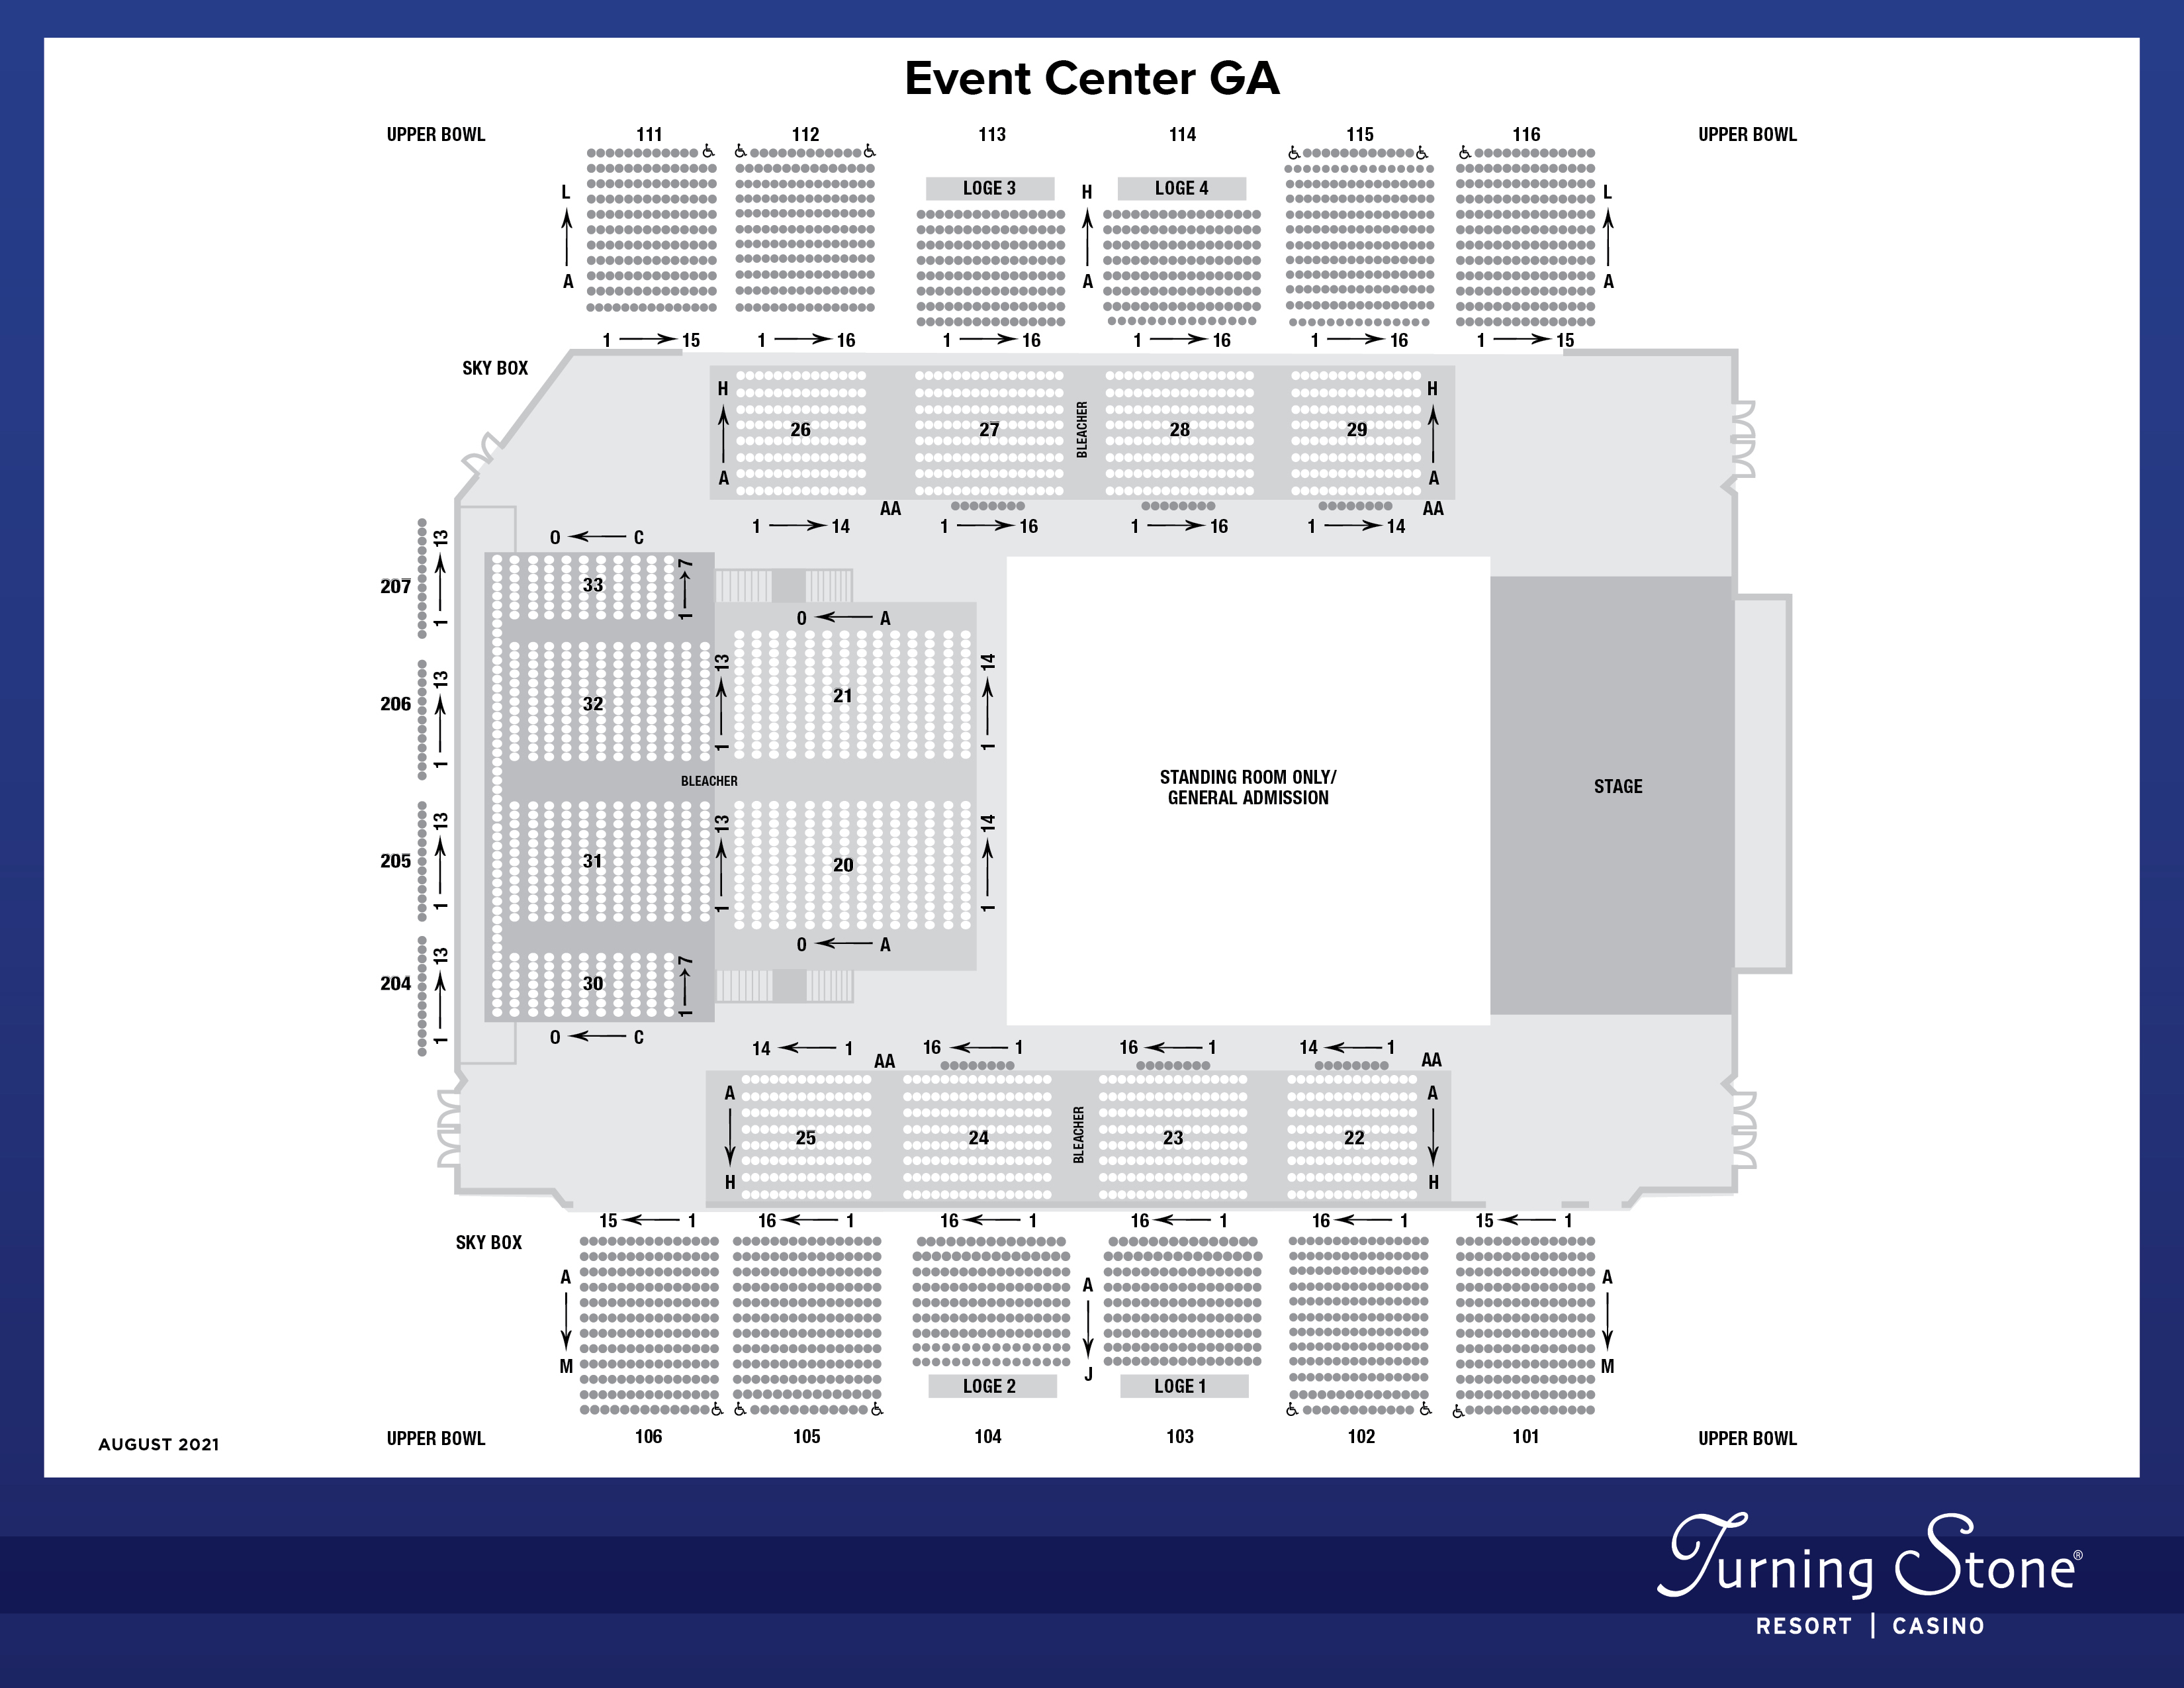 Turning Stone Event Center General Admission Seating Chart